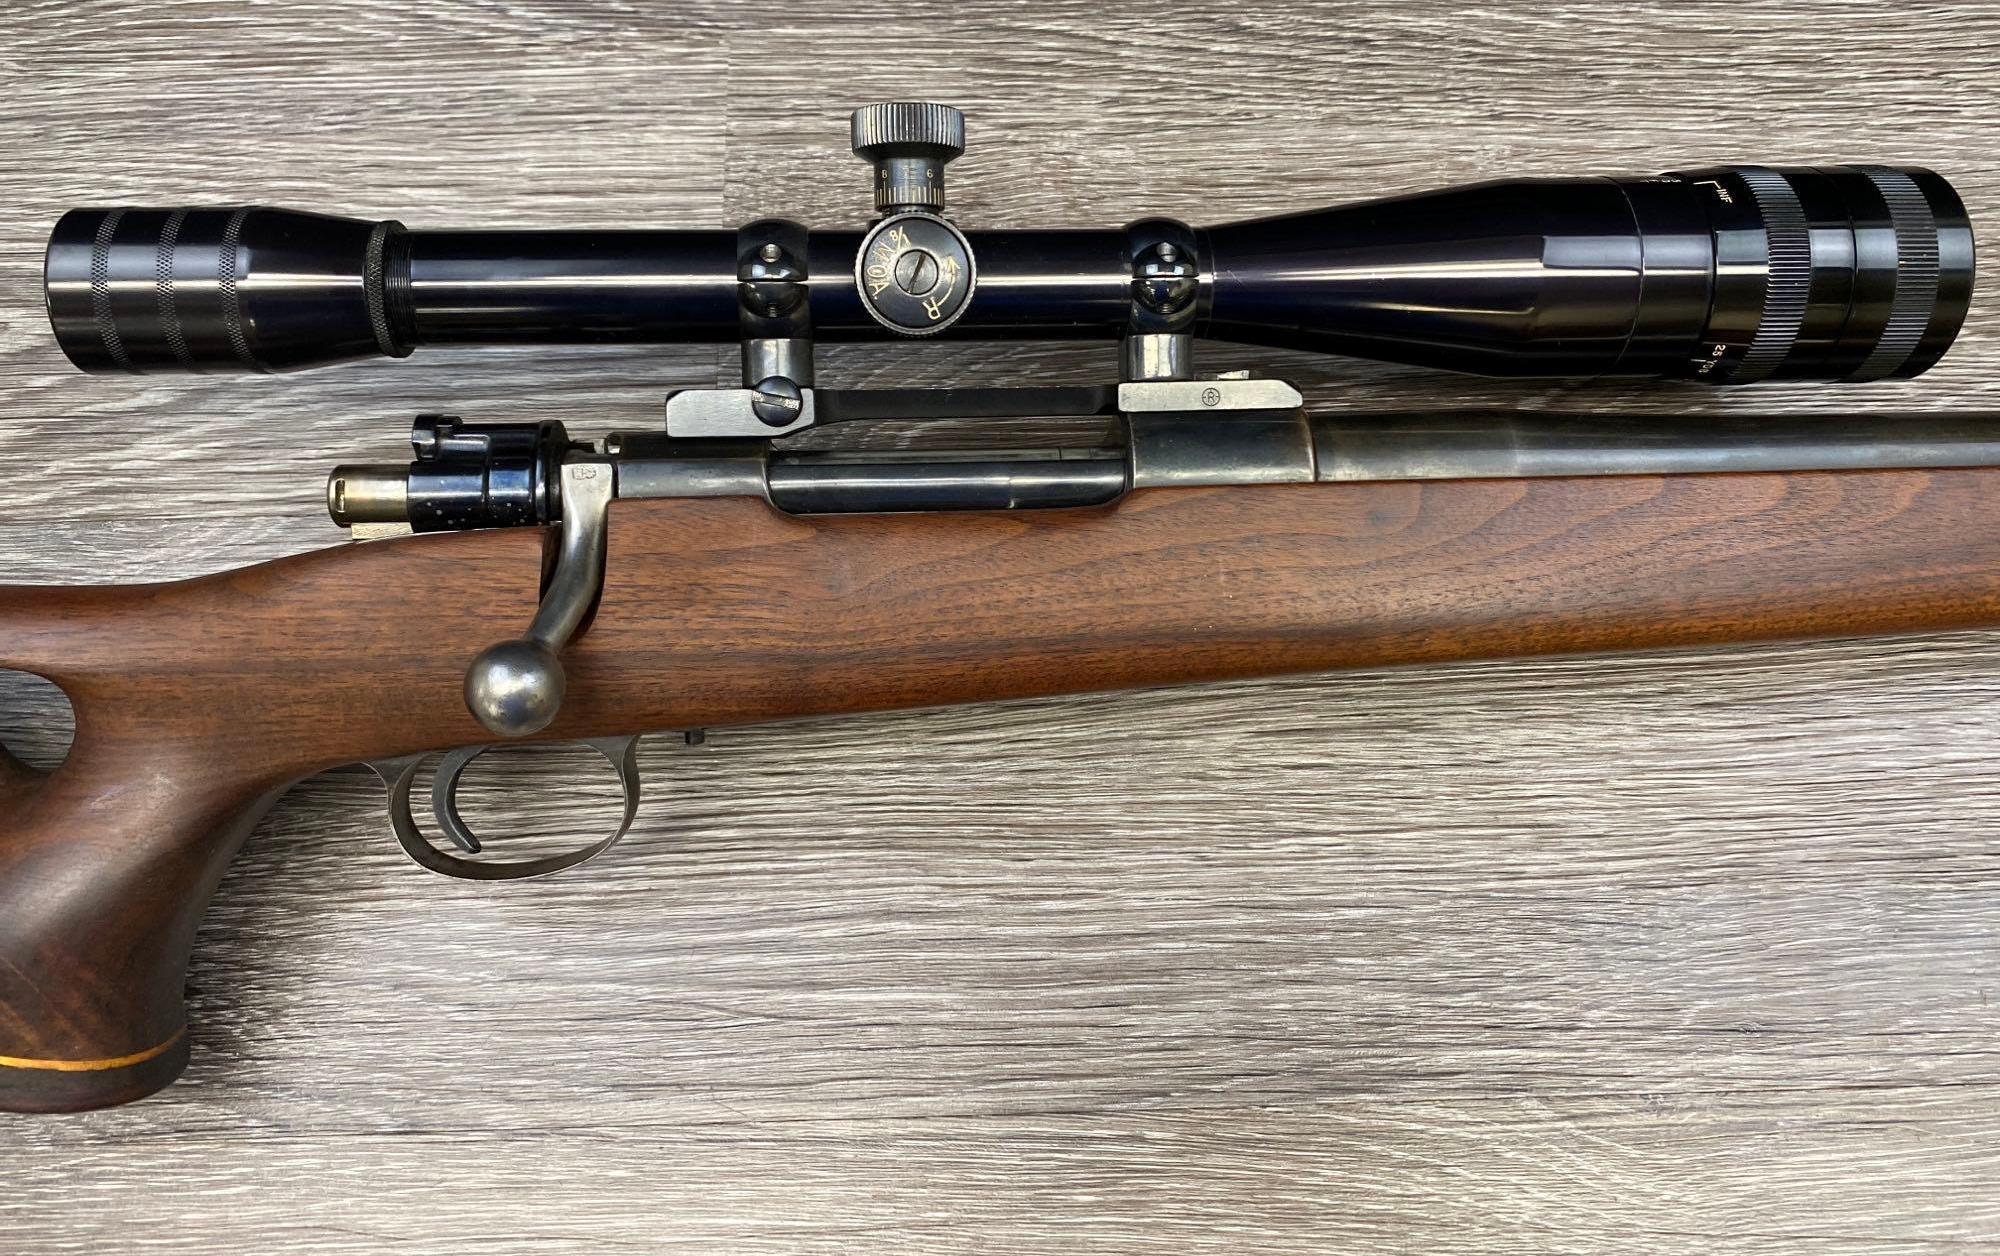 CUSTOM FN COMMERCIAL MAUSER BOLT ACTION 7mm-08 CAL RIFLE W/ SCOPE